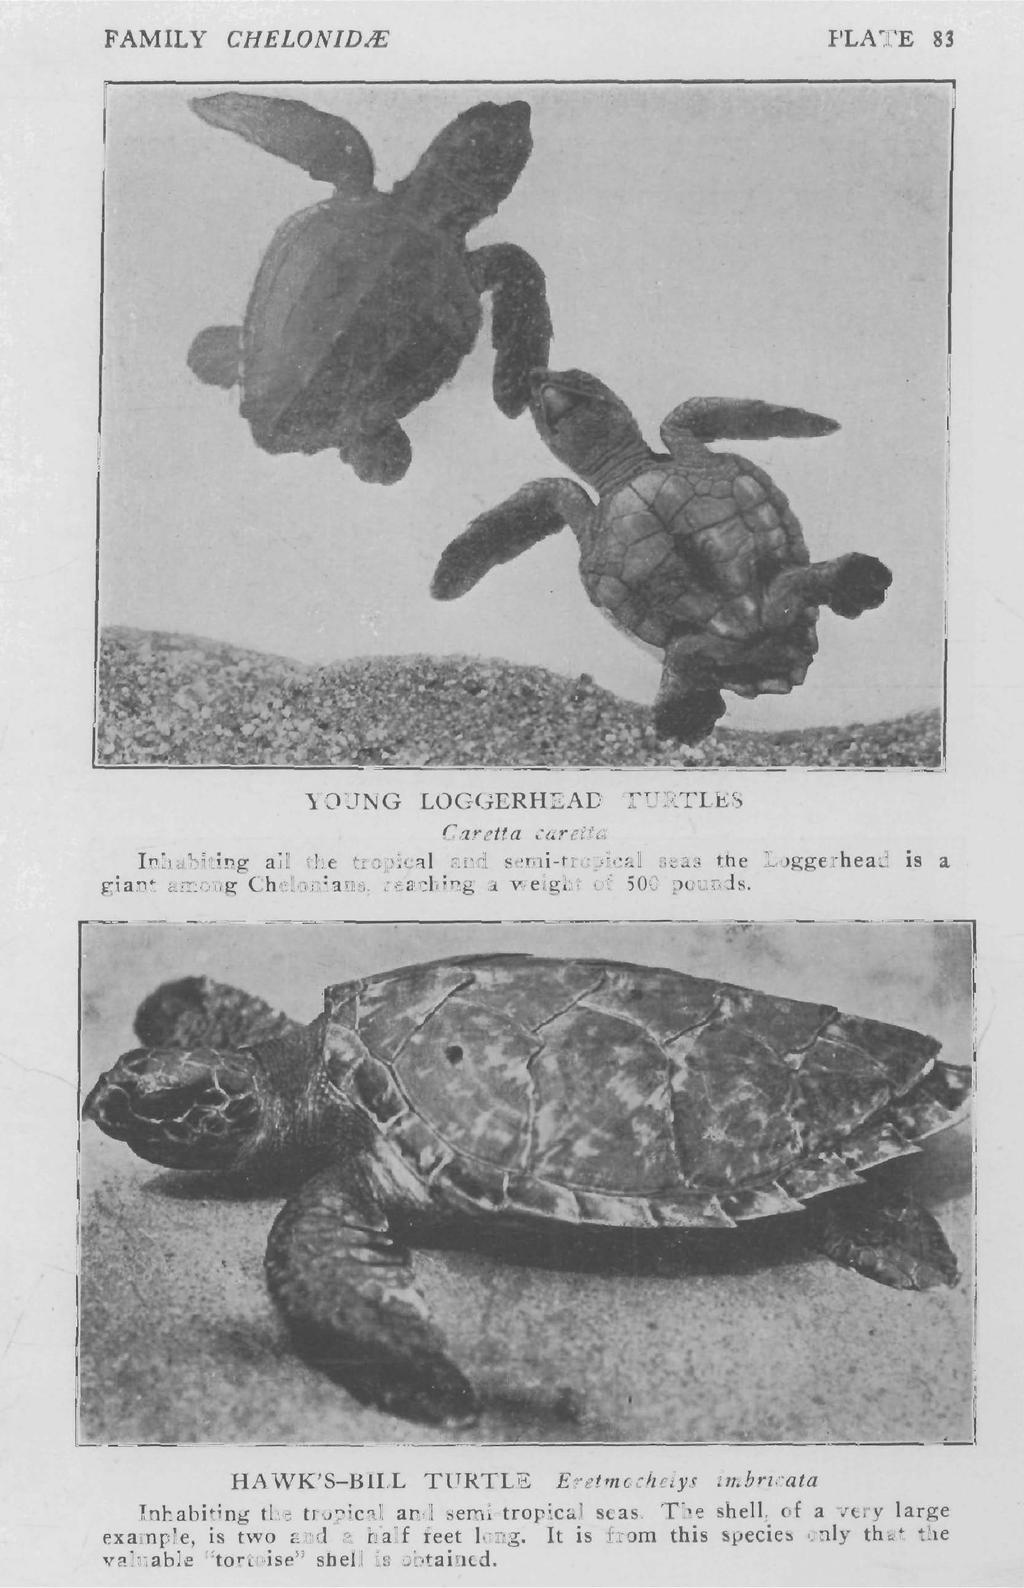 FAMILY CHELON/DIE PLATE 83 YOUNG LOGGERHEAD TURTLES Caretta caretta Inhabiting all the tropical and semi-tropical seas the Loggerhead is a giant among Chelonians. reaching a weight of 500 pounds.